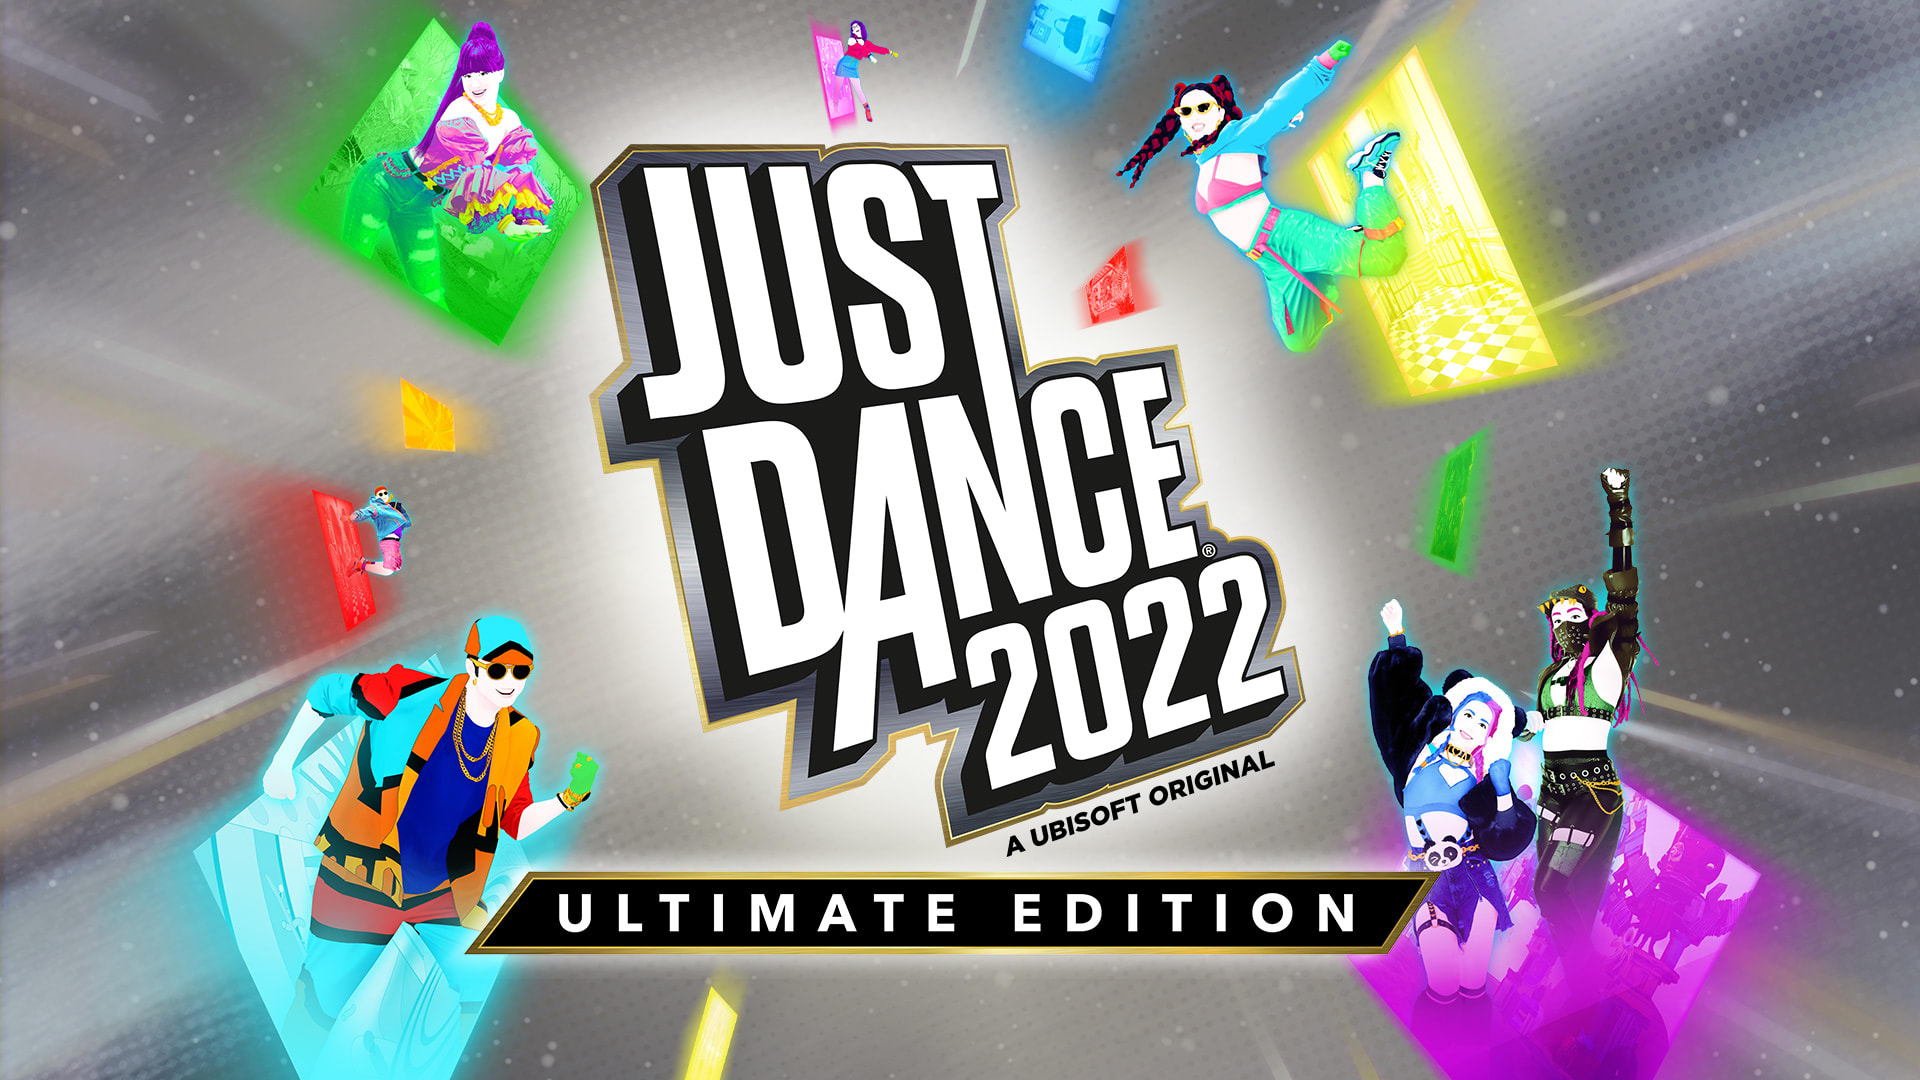 Just Dance® 2022 Ultimate Edition